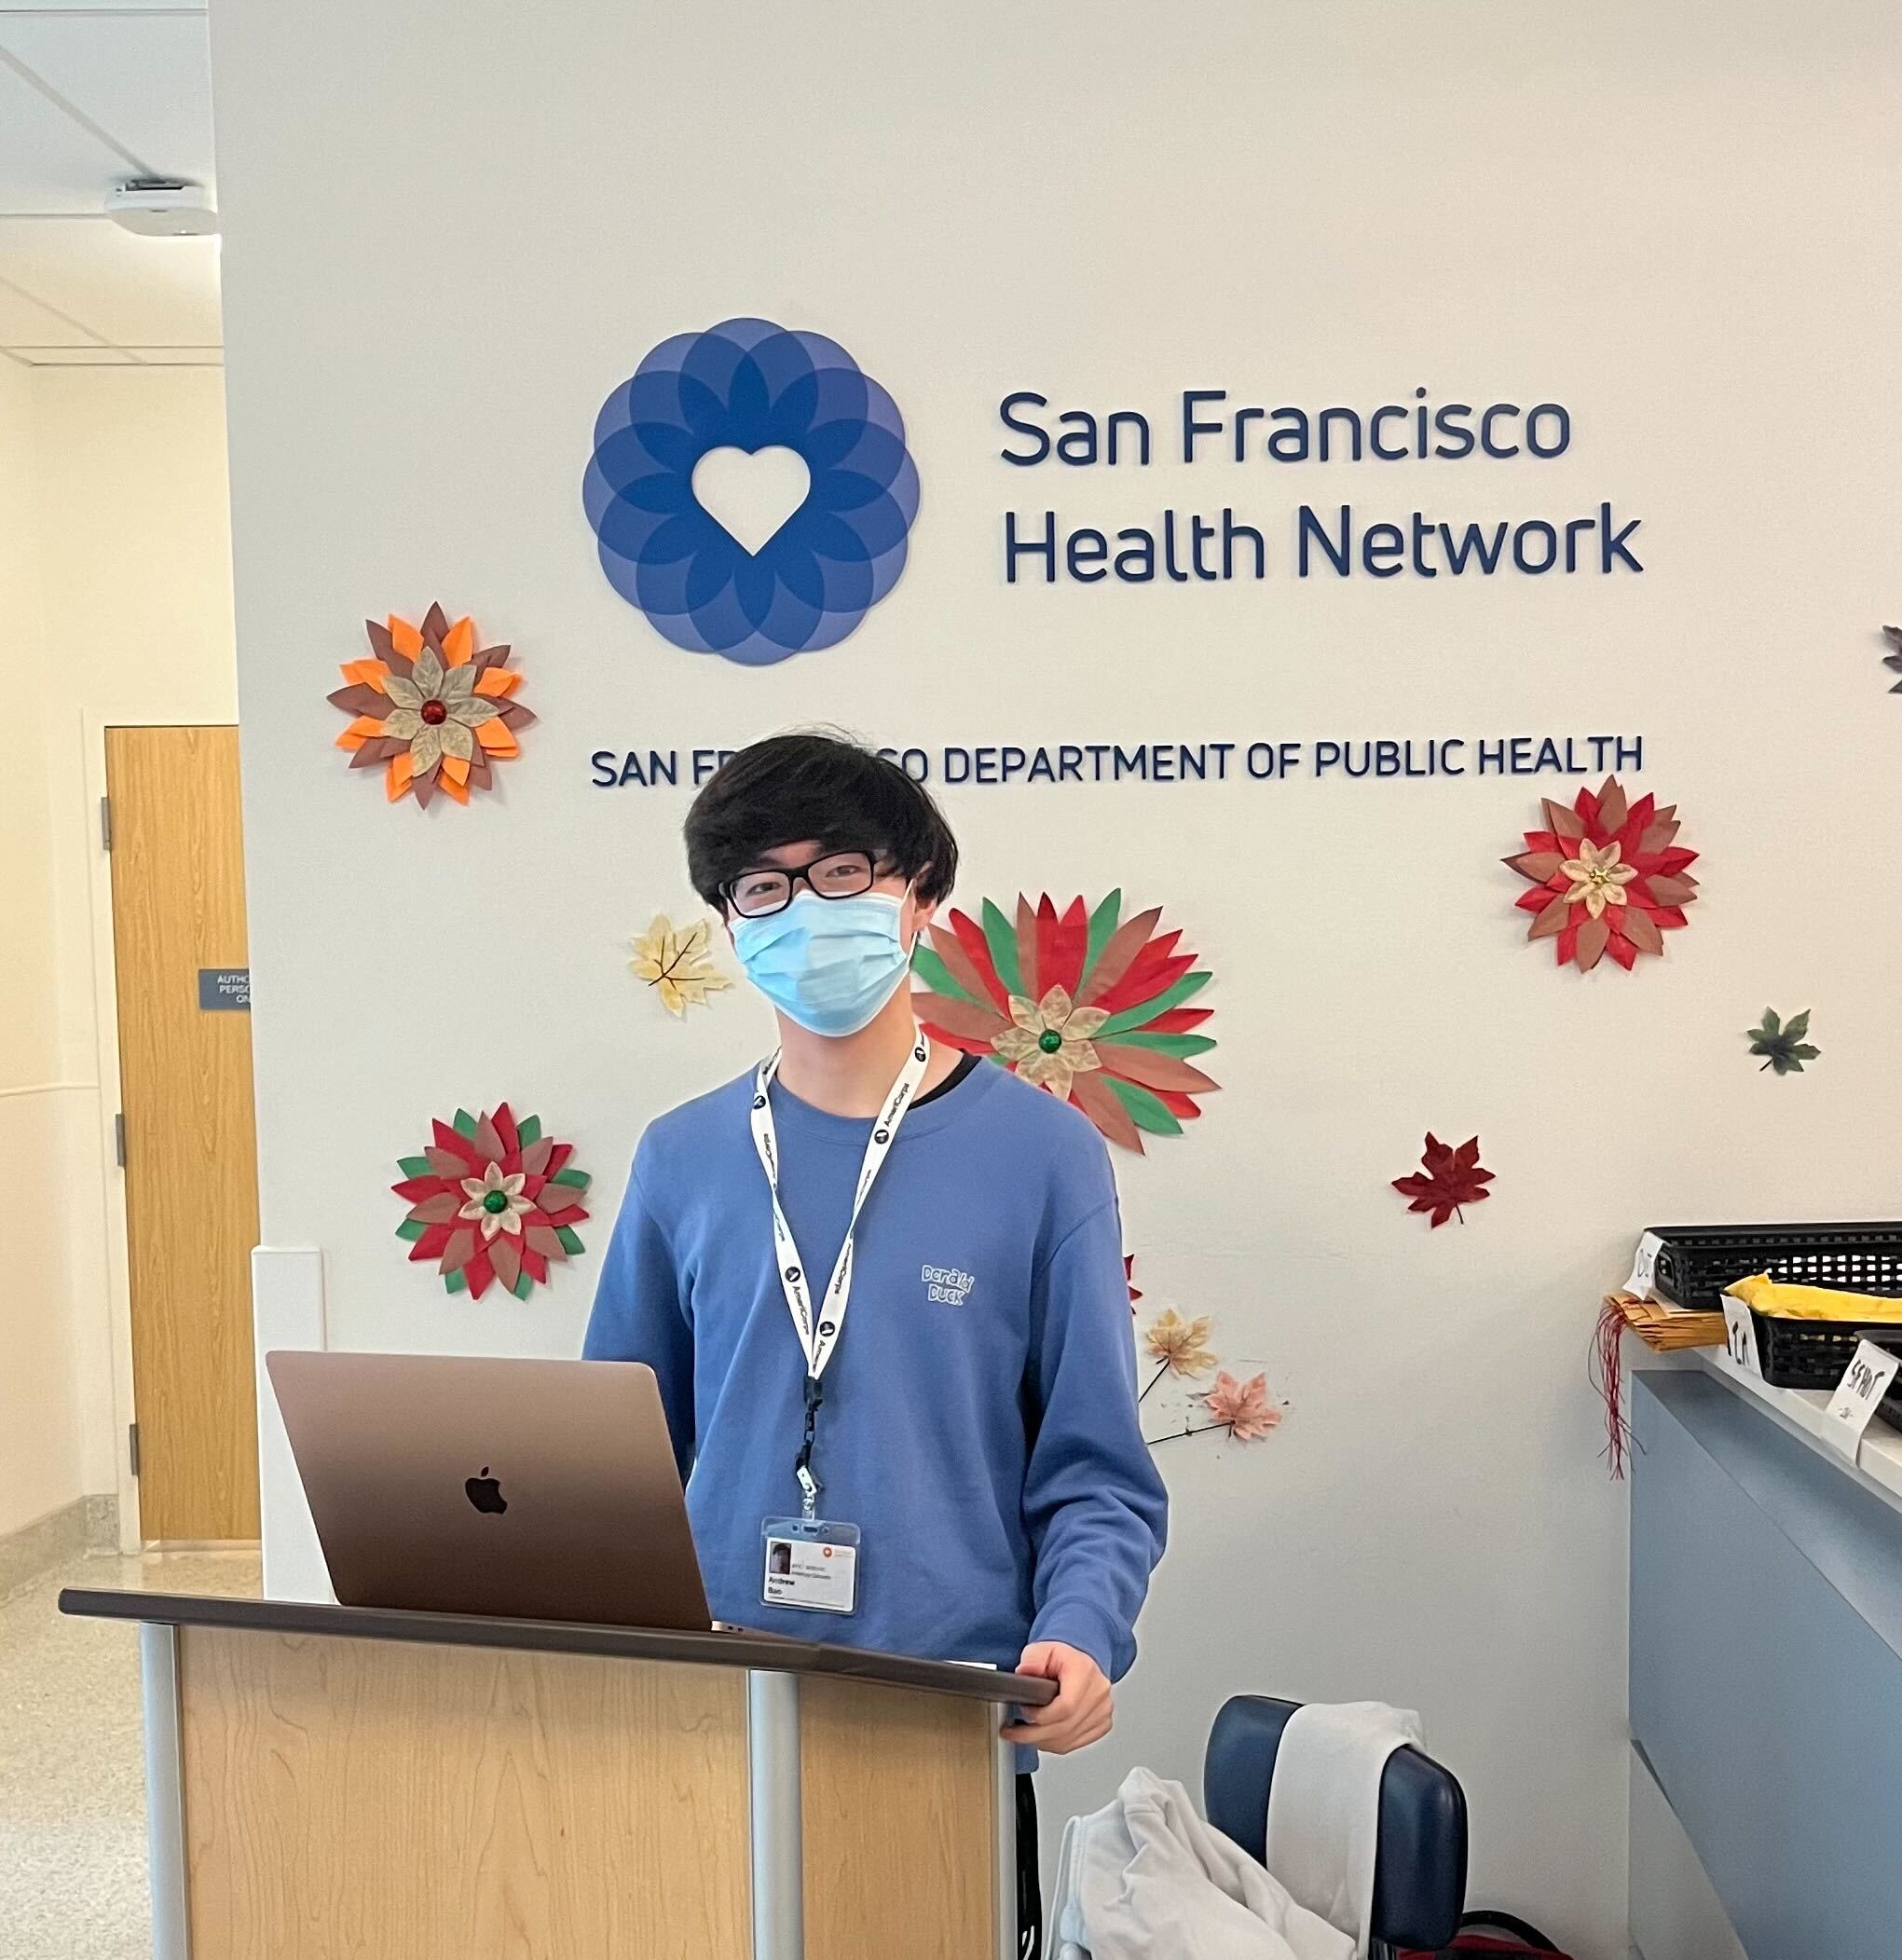 A person stands behind the podium facing the camera. Behind the person is a wall with the San Francisco Health Network logo.